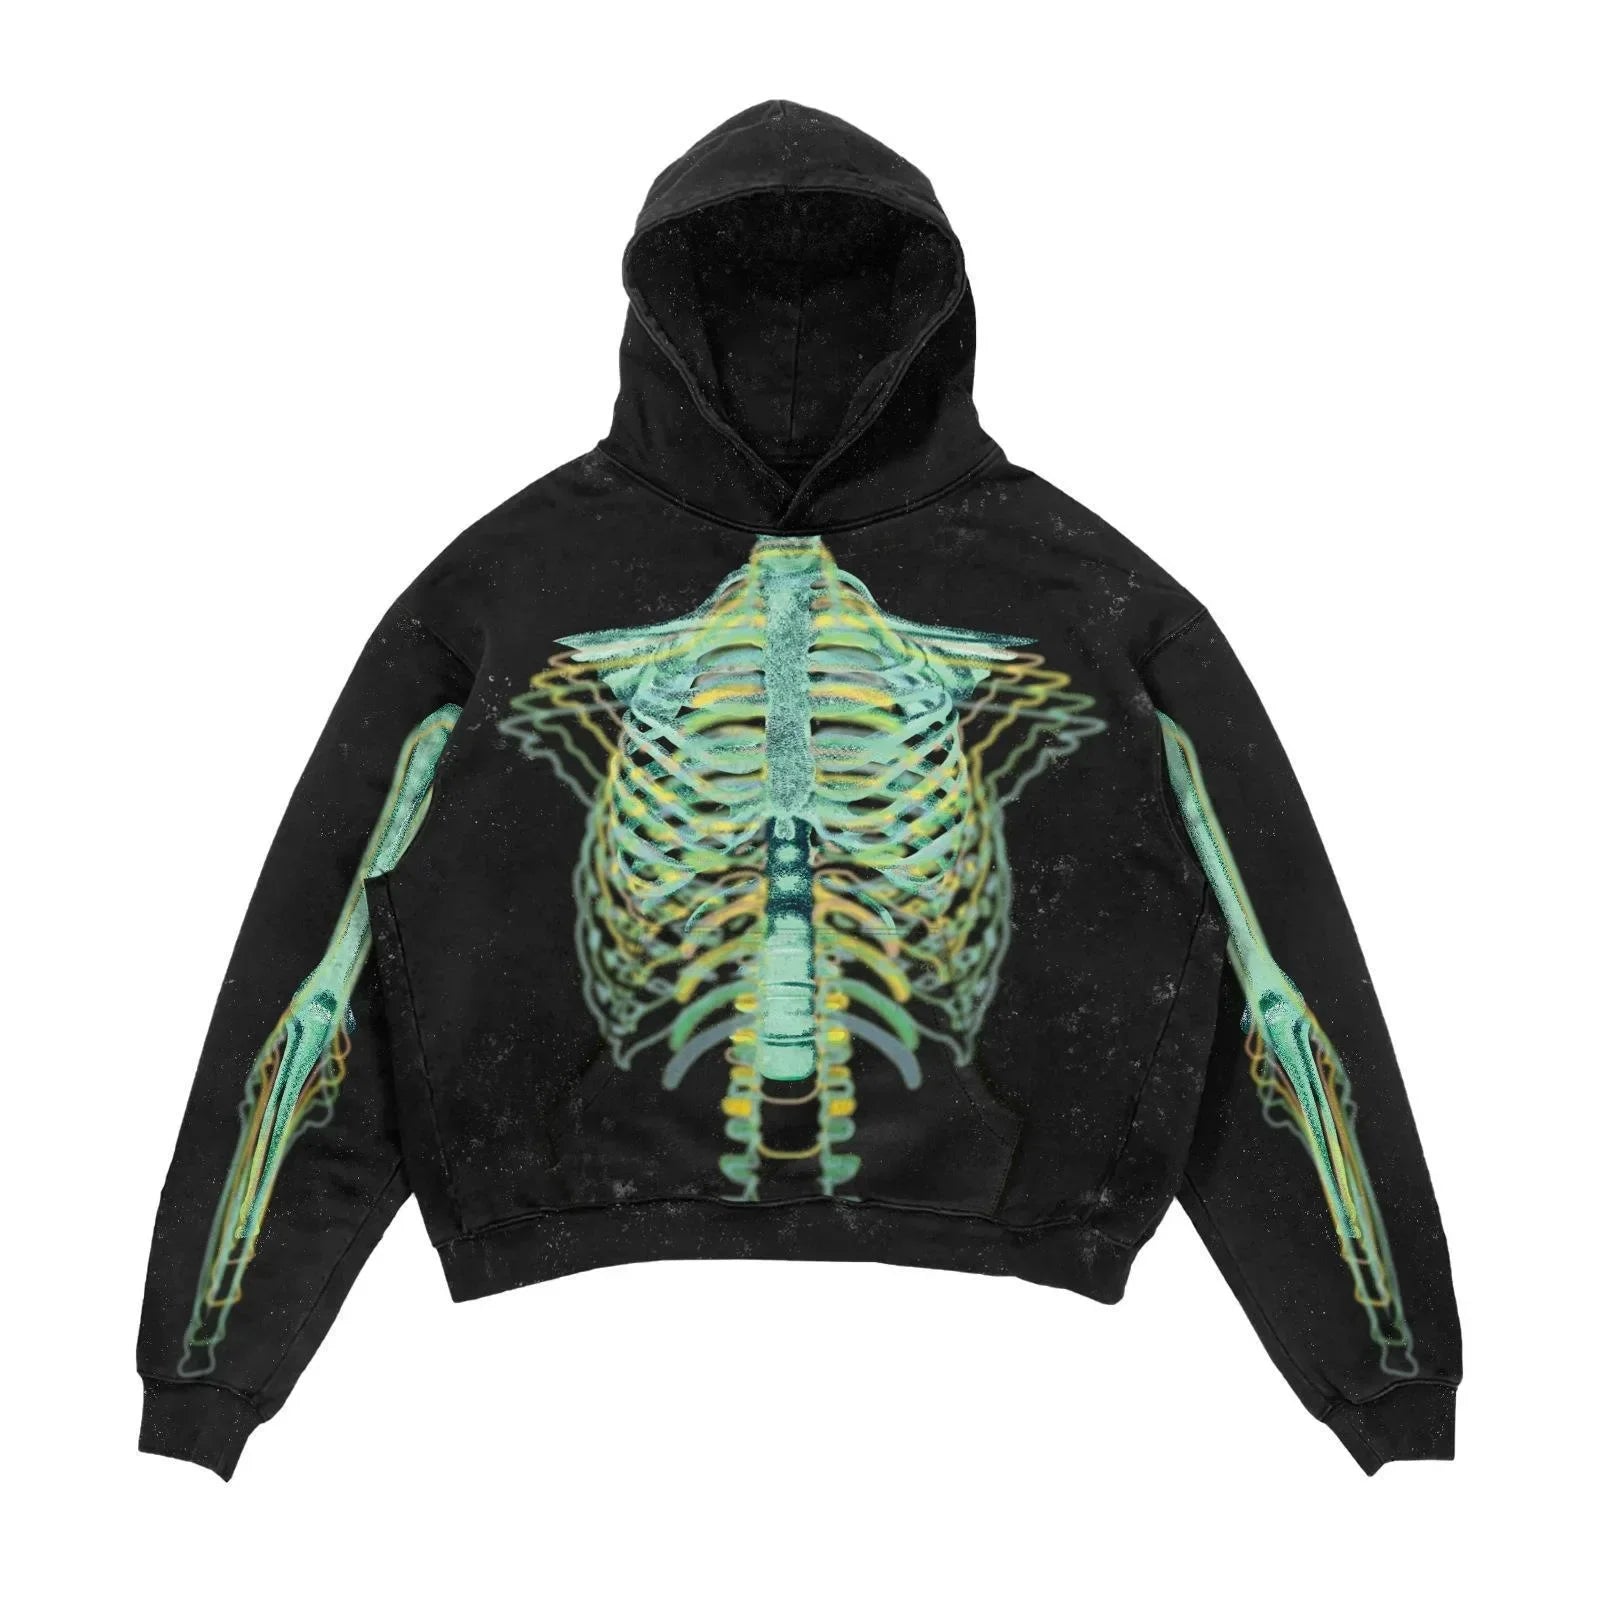 A Maramalive™ Explosions Printed Skull Y2K Retro Hooded Sweater Coat Street Style Gothic Casual Fashion Hooded Sweater Men's Female in punk style featuring a detailed, colorful print of a human ribcage and arm bones on its front, crafted from durable polyester.